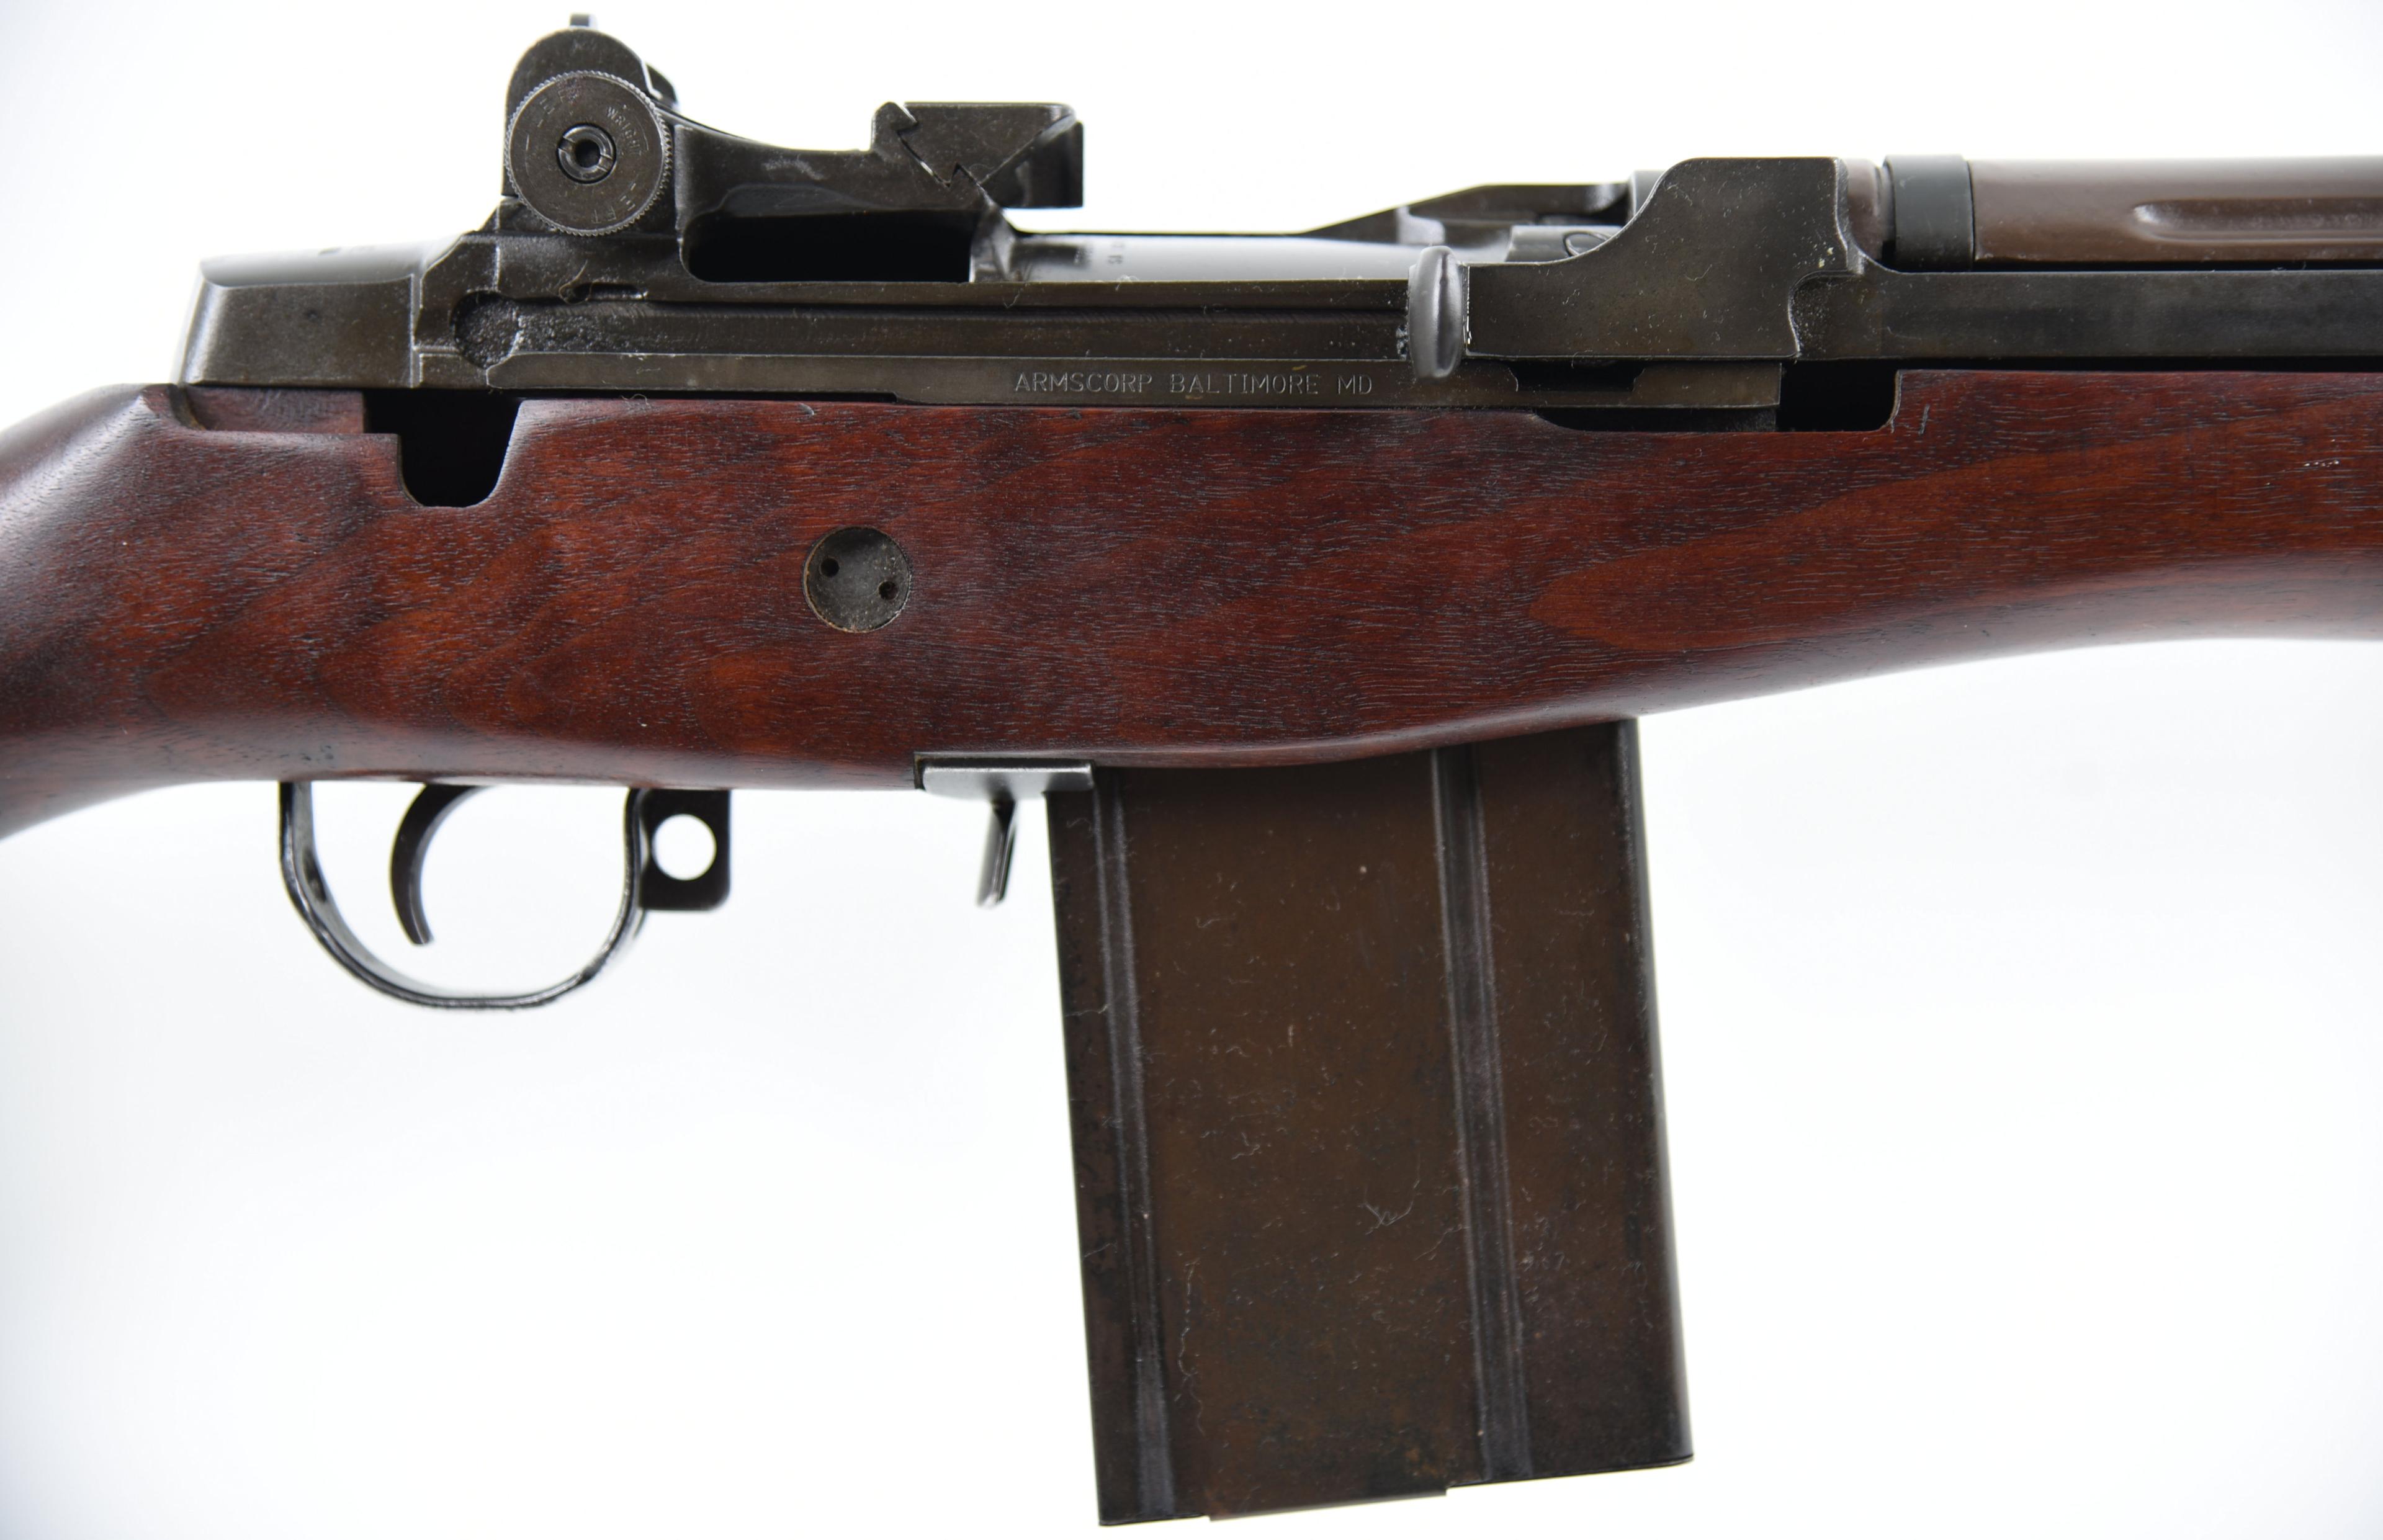 Armscorp M14 National Match SA Rifle. NO MD BIDDERS. FIREARM IS ON BANNED LIST IN MD BY MDSP